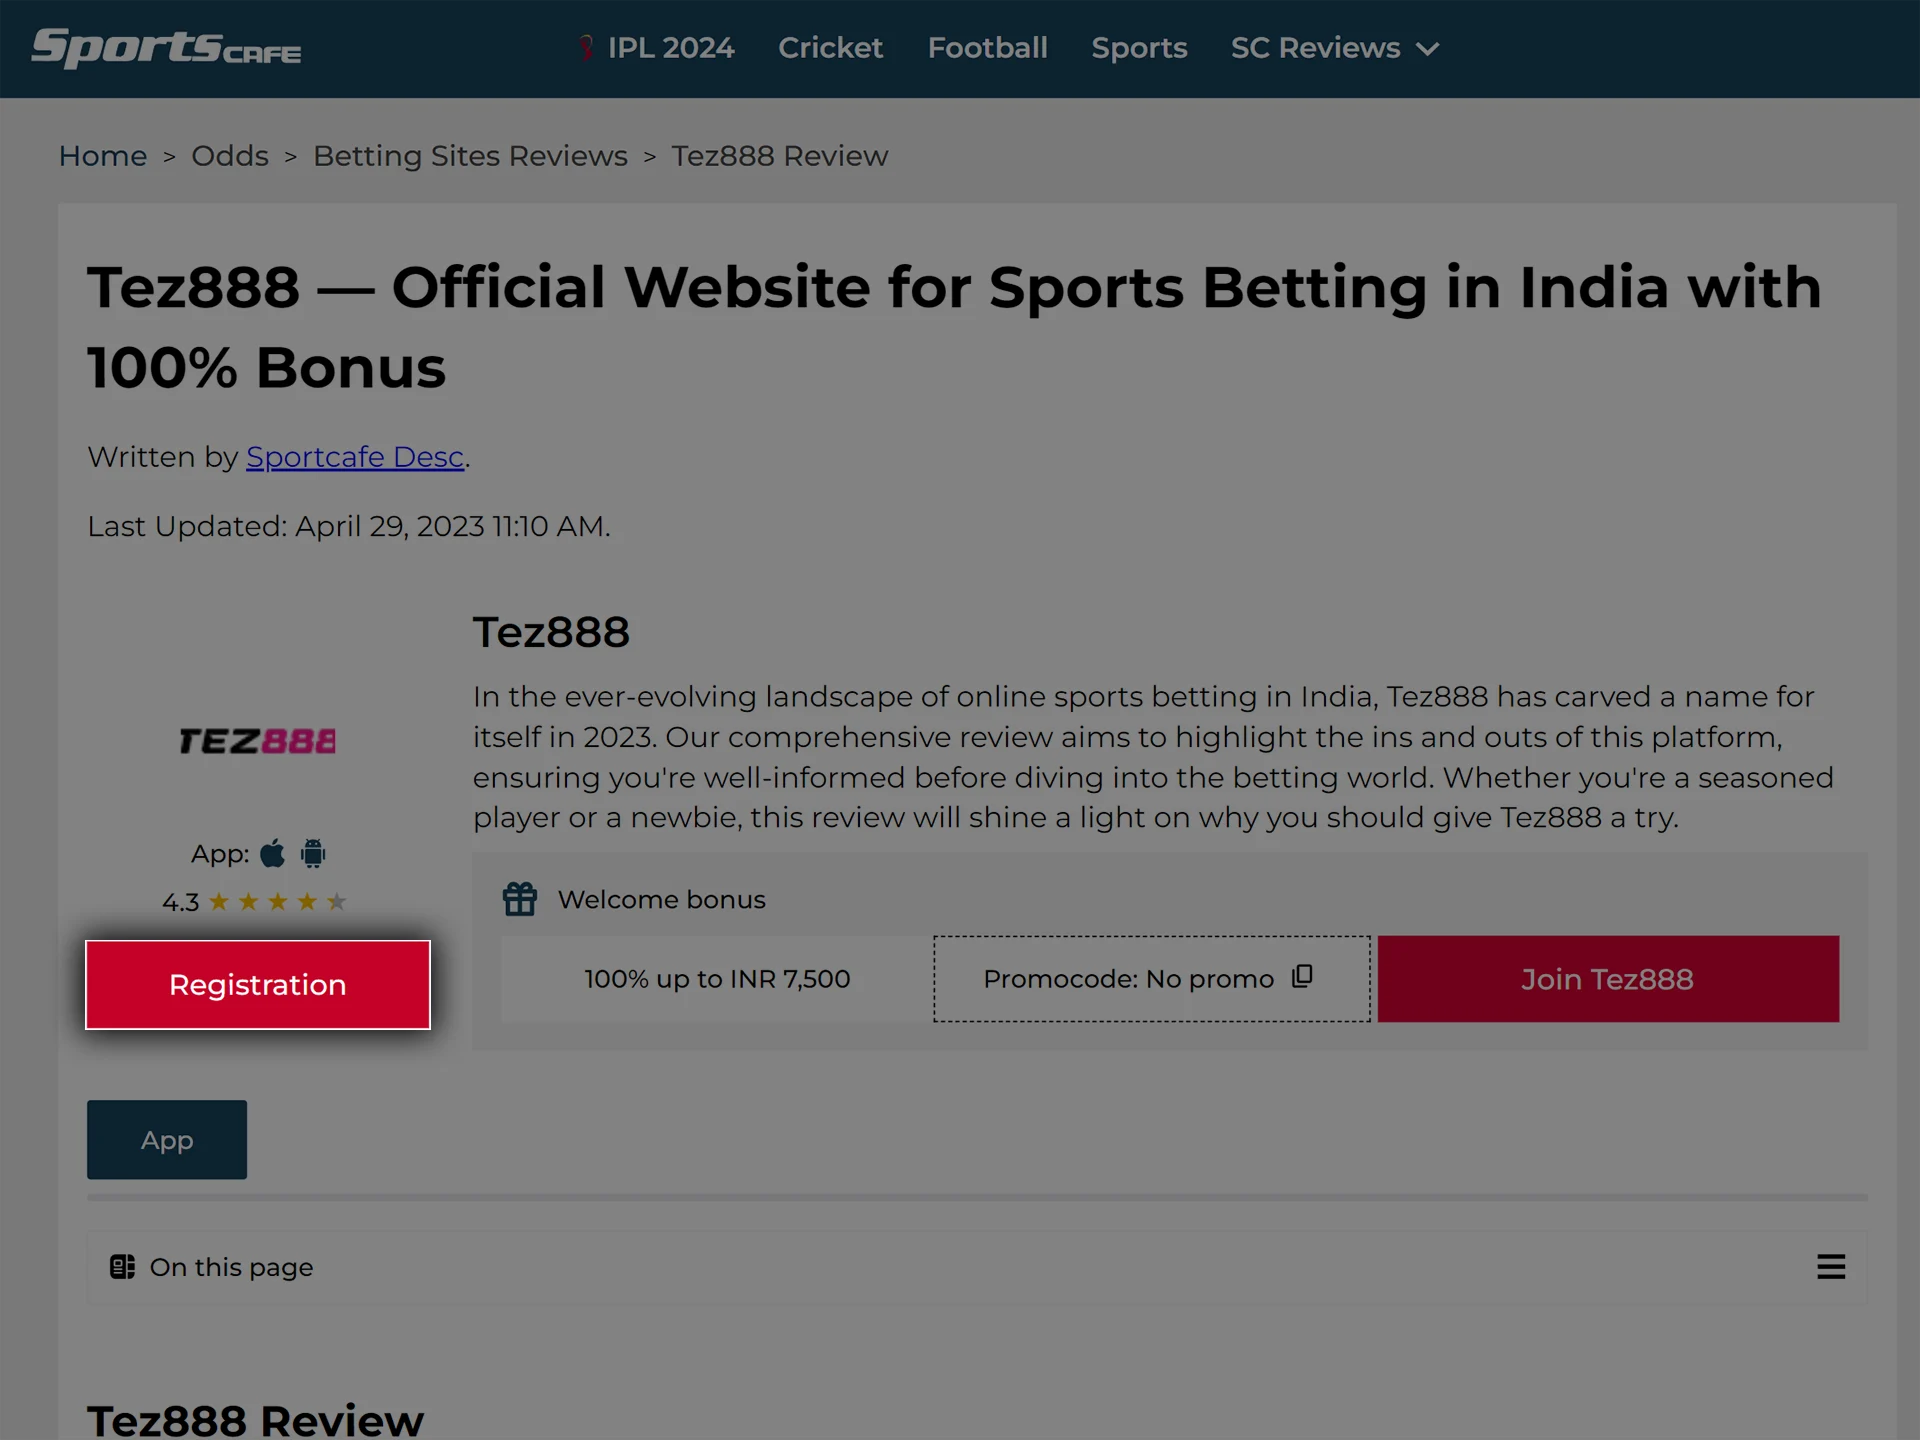 Use the link in the review header to open the Tez888 website.